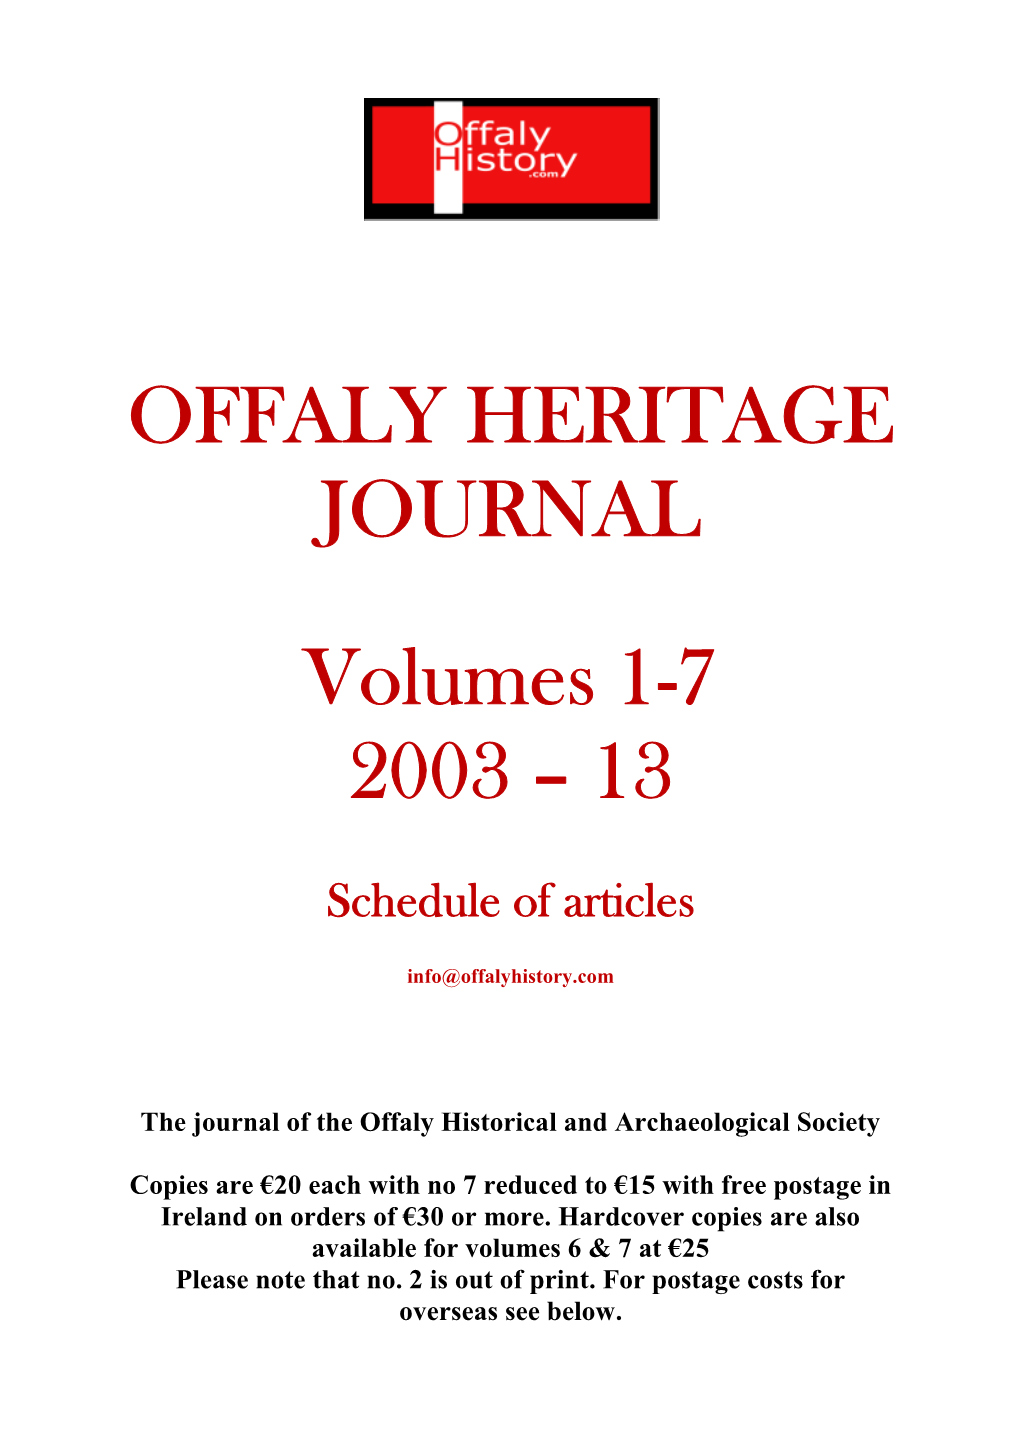 OFFALY HERITAGE JOURNAL Volumes 1-7 2003